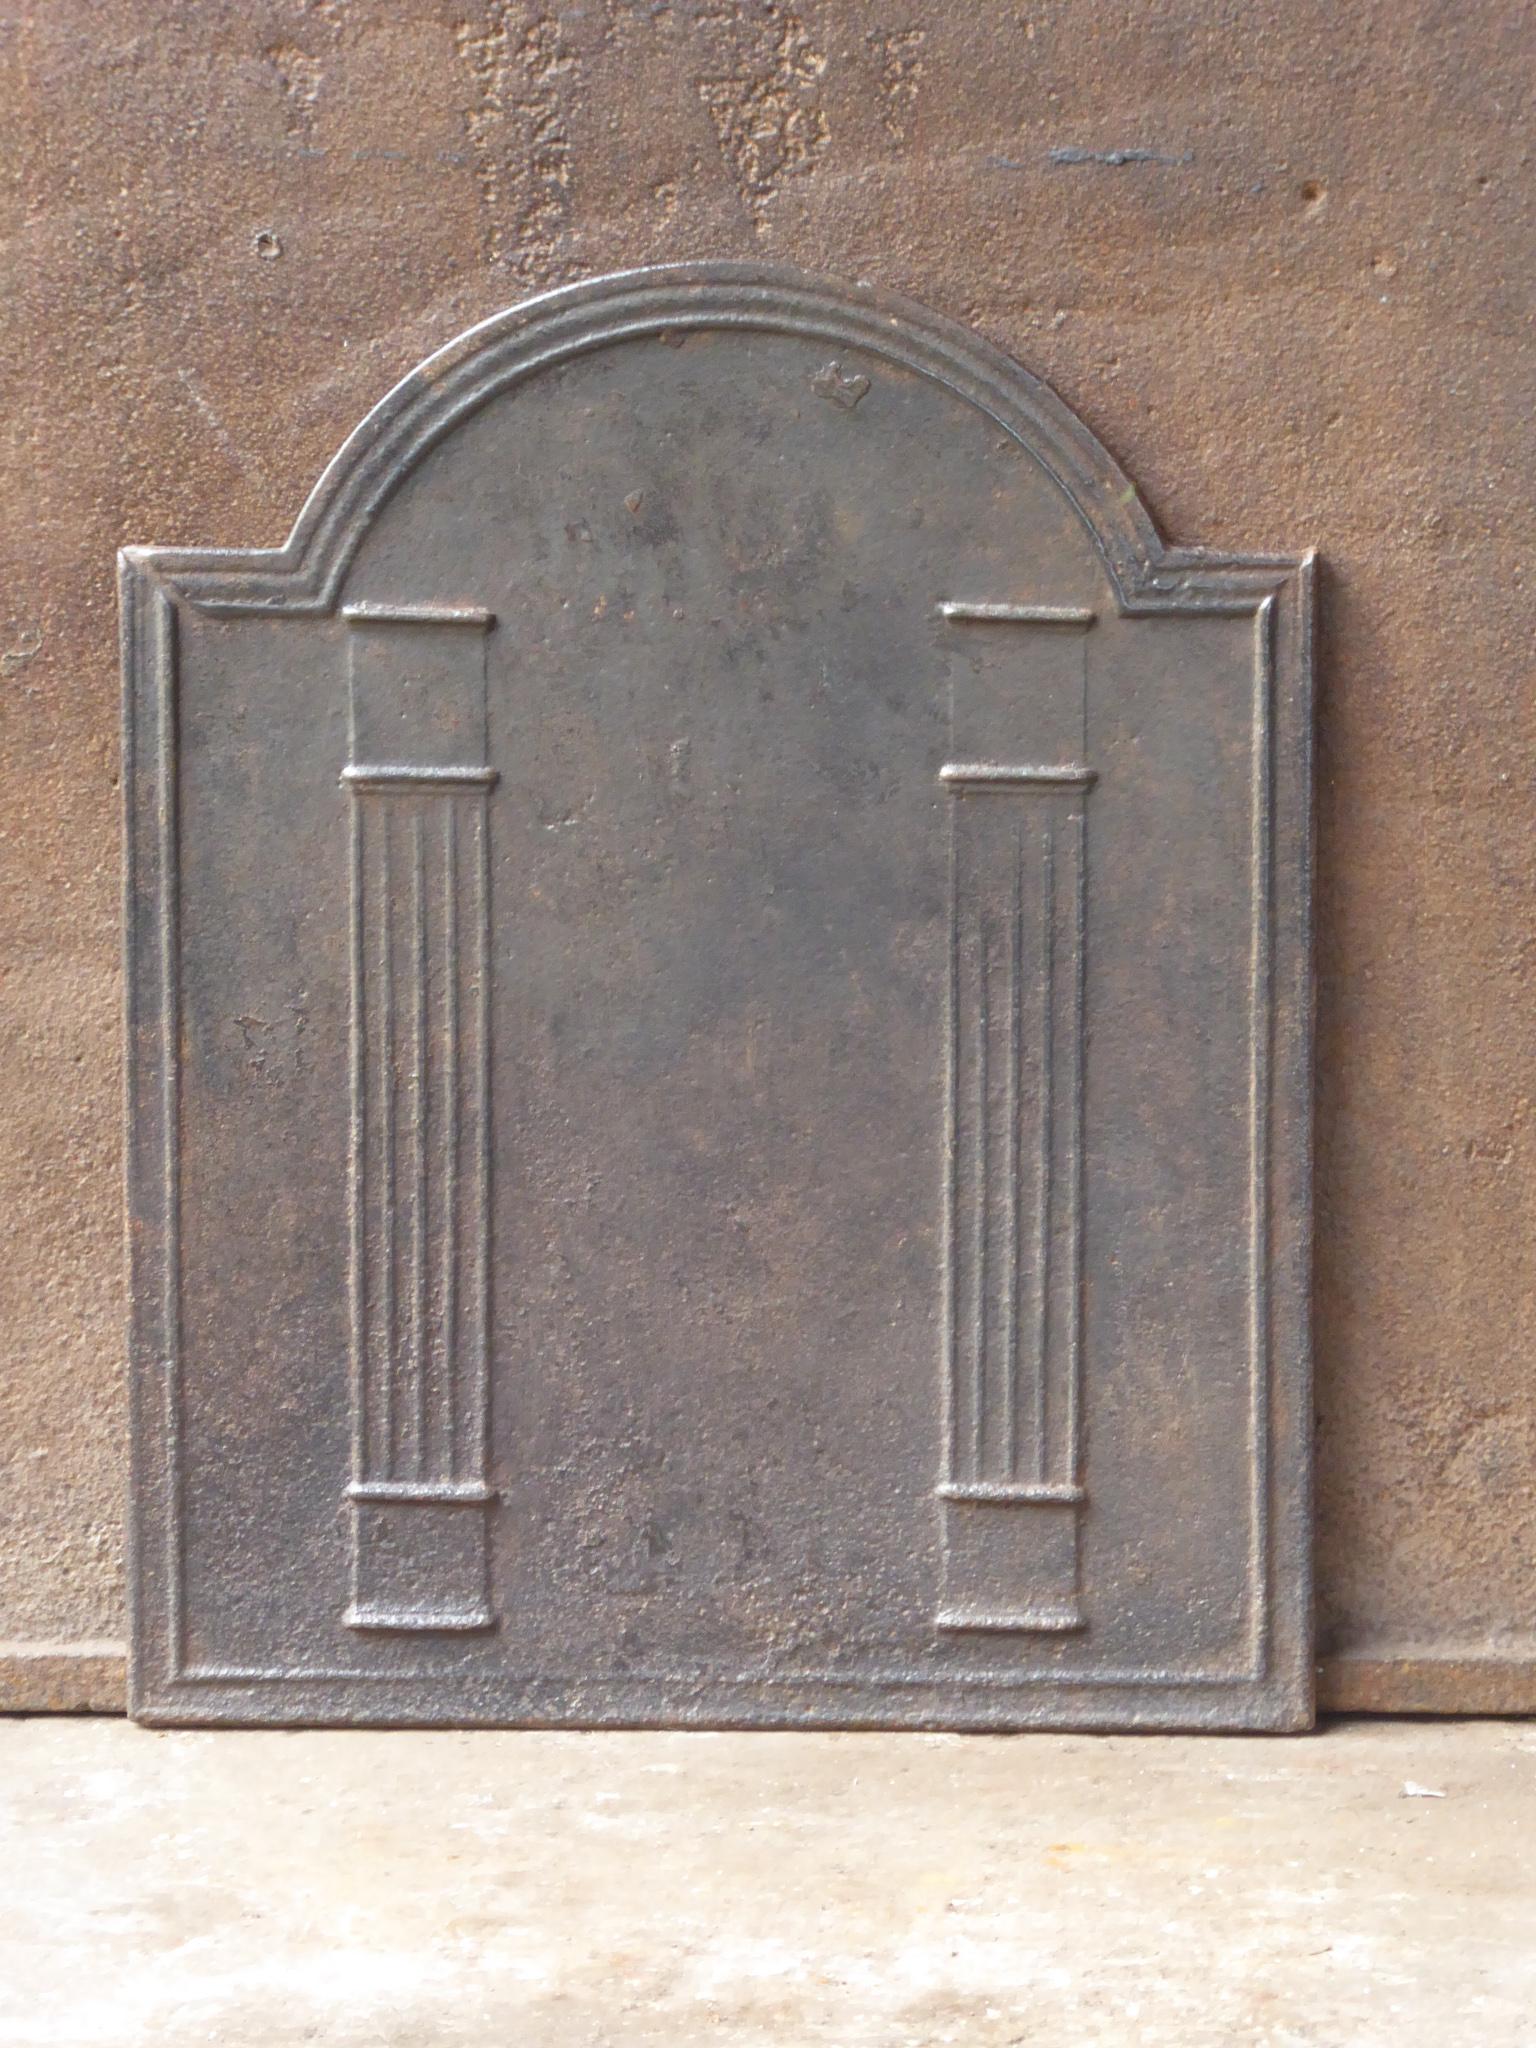 19th Century French neoclassical fireback with two pillars of freedom. The pillars symbolize the value liberty, one of the three values of the French revolution. 

The fireback is made of cast iron and has a natural brown patina. Upon request it